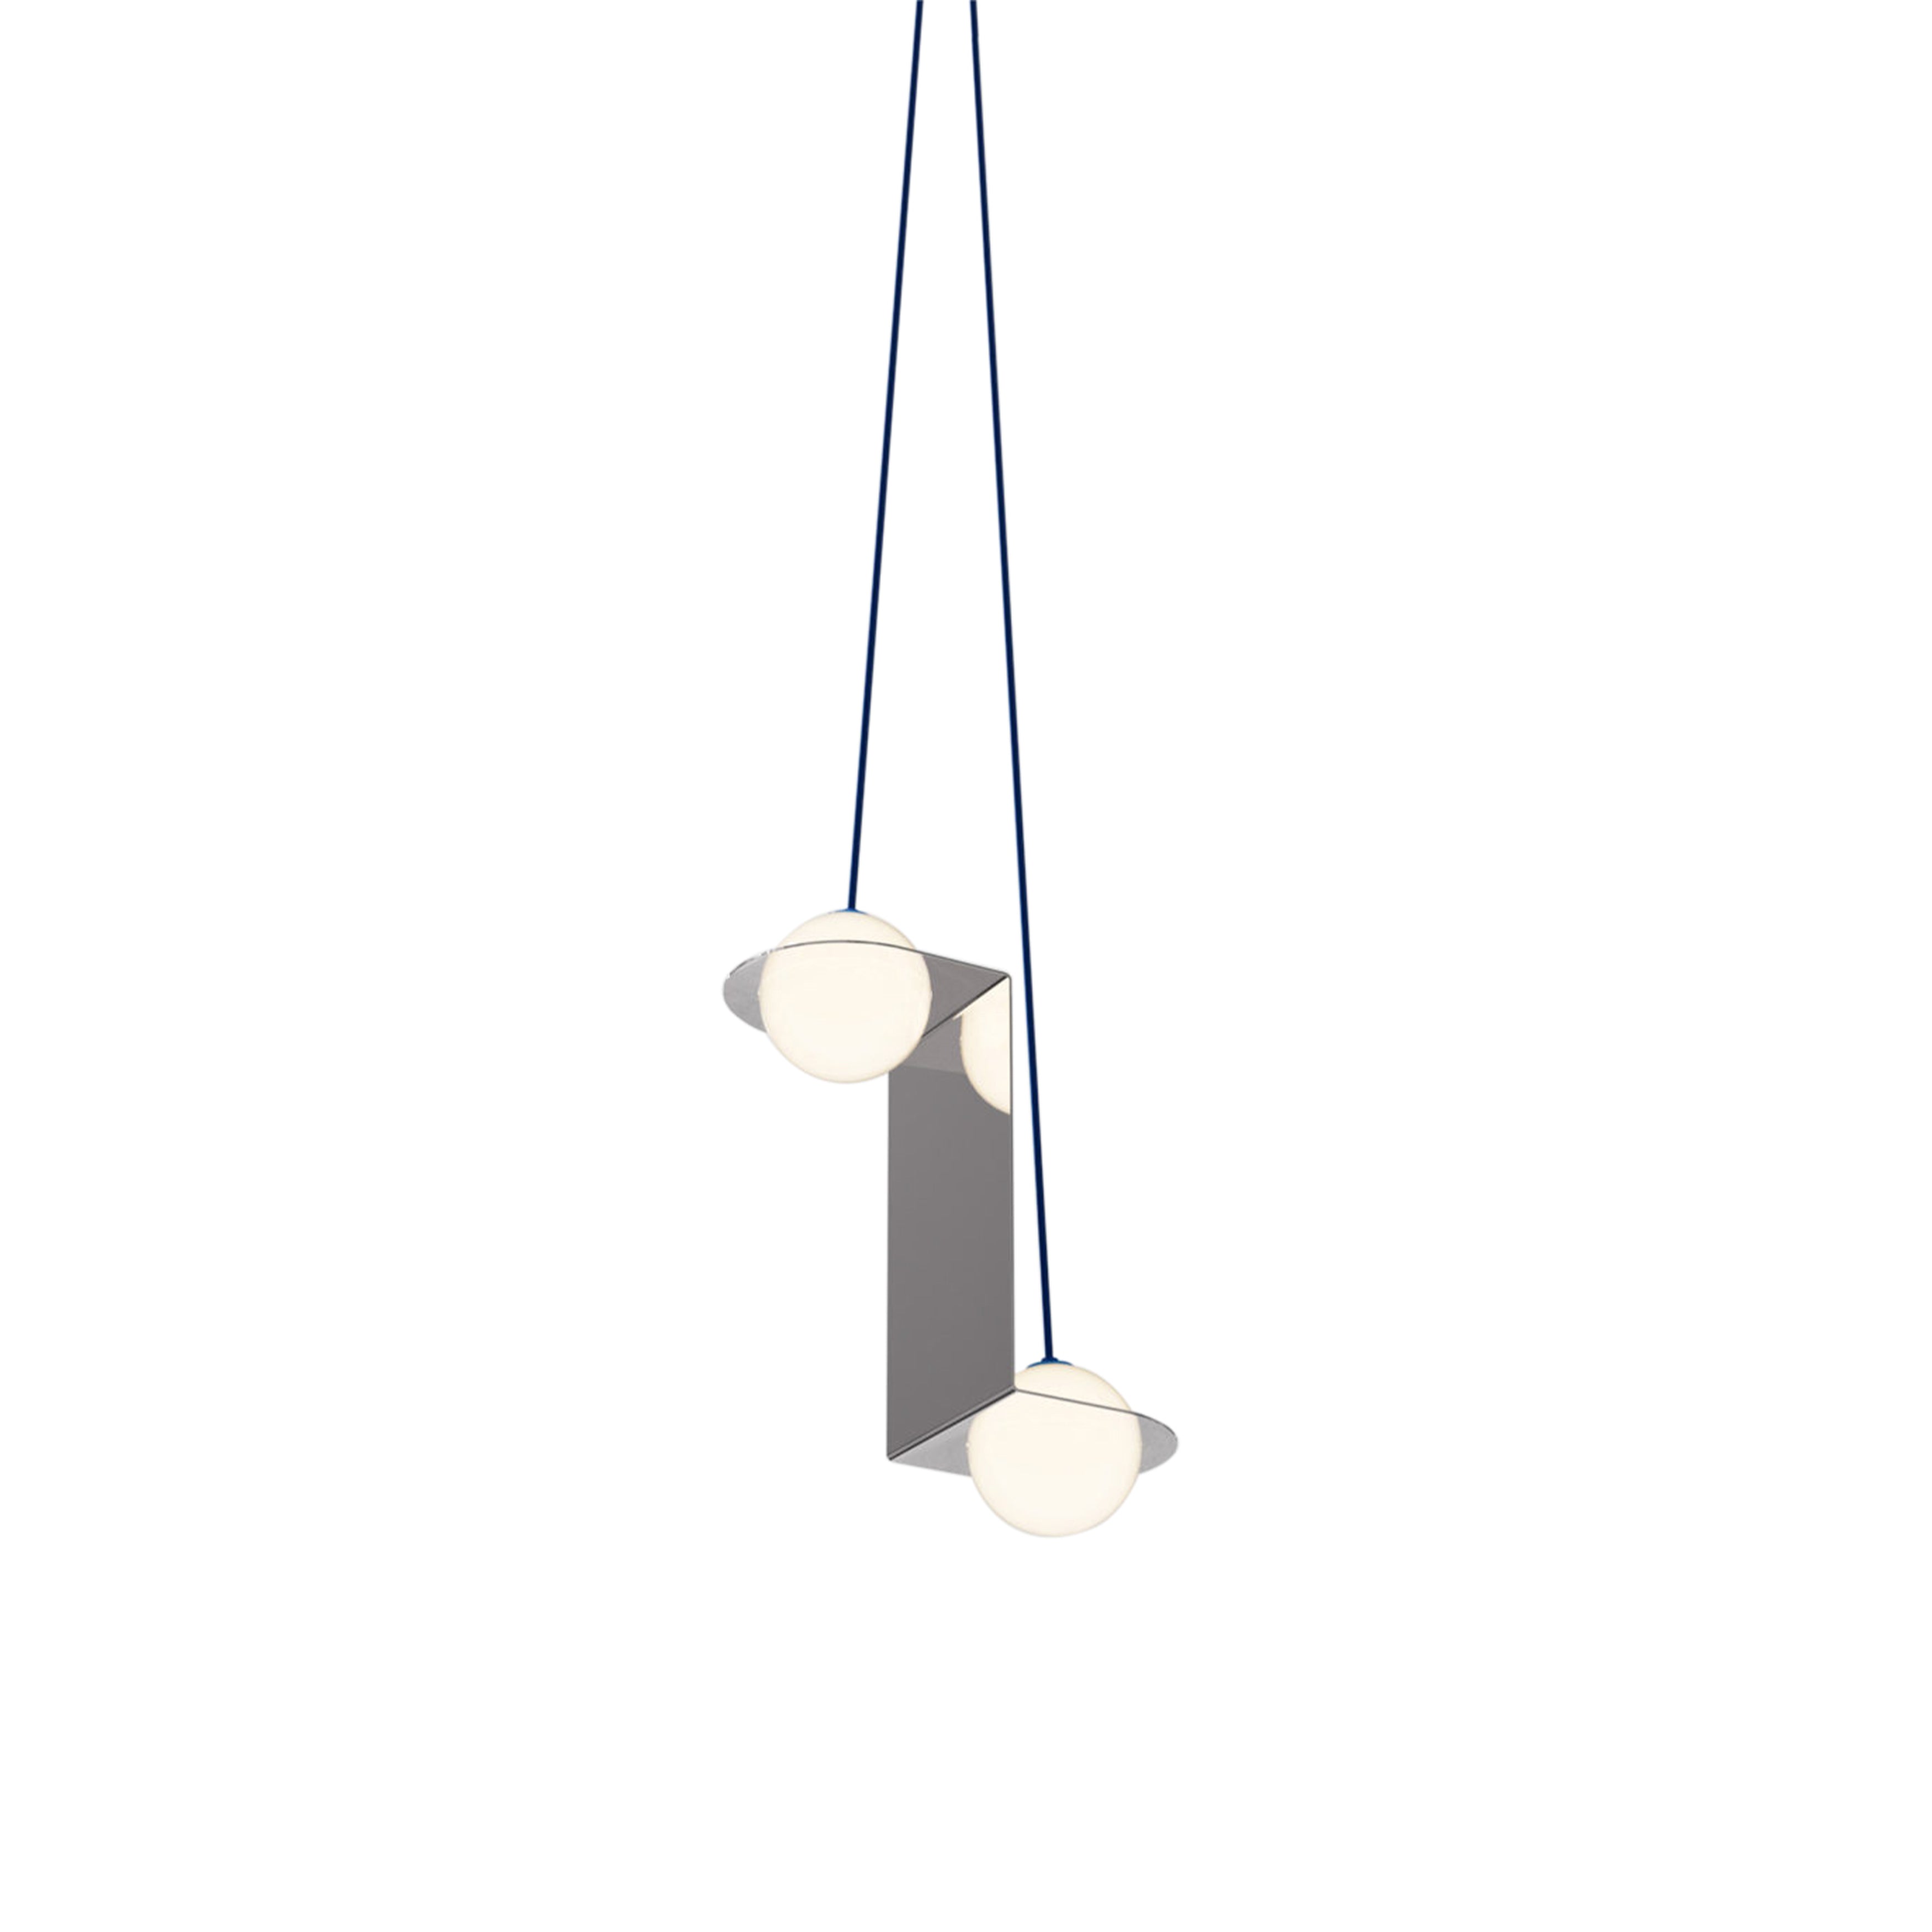 Laurent 05 Suspension Lamp: Nickel Plated + Blue + Angled Wires